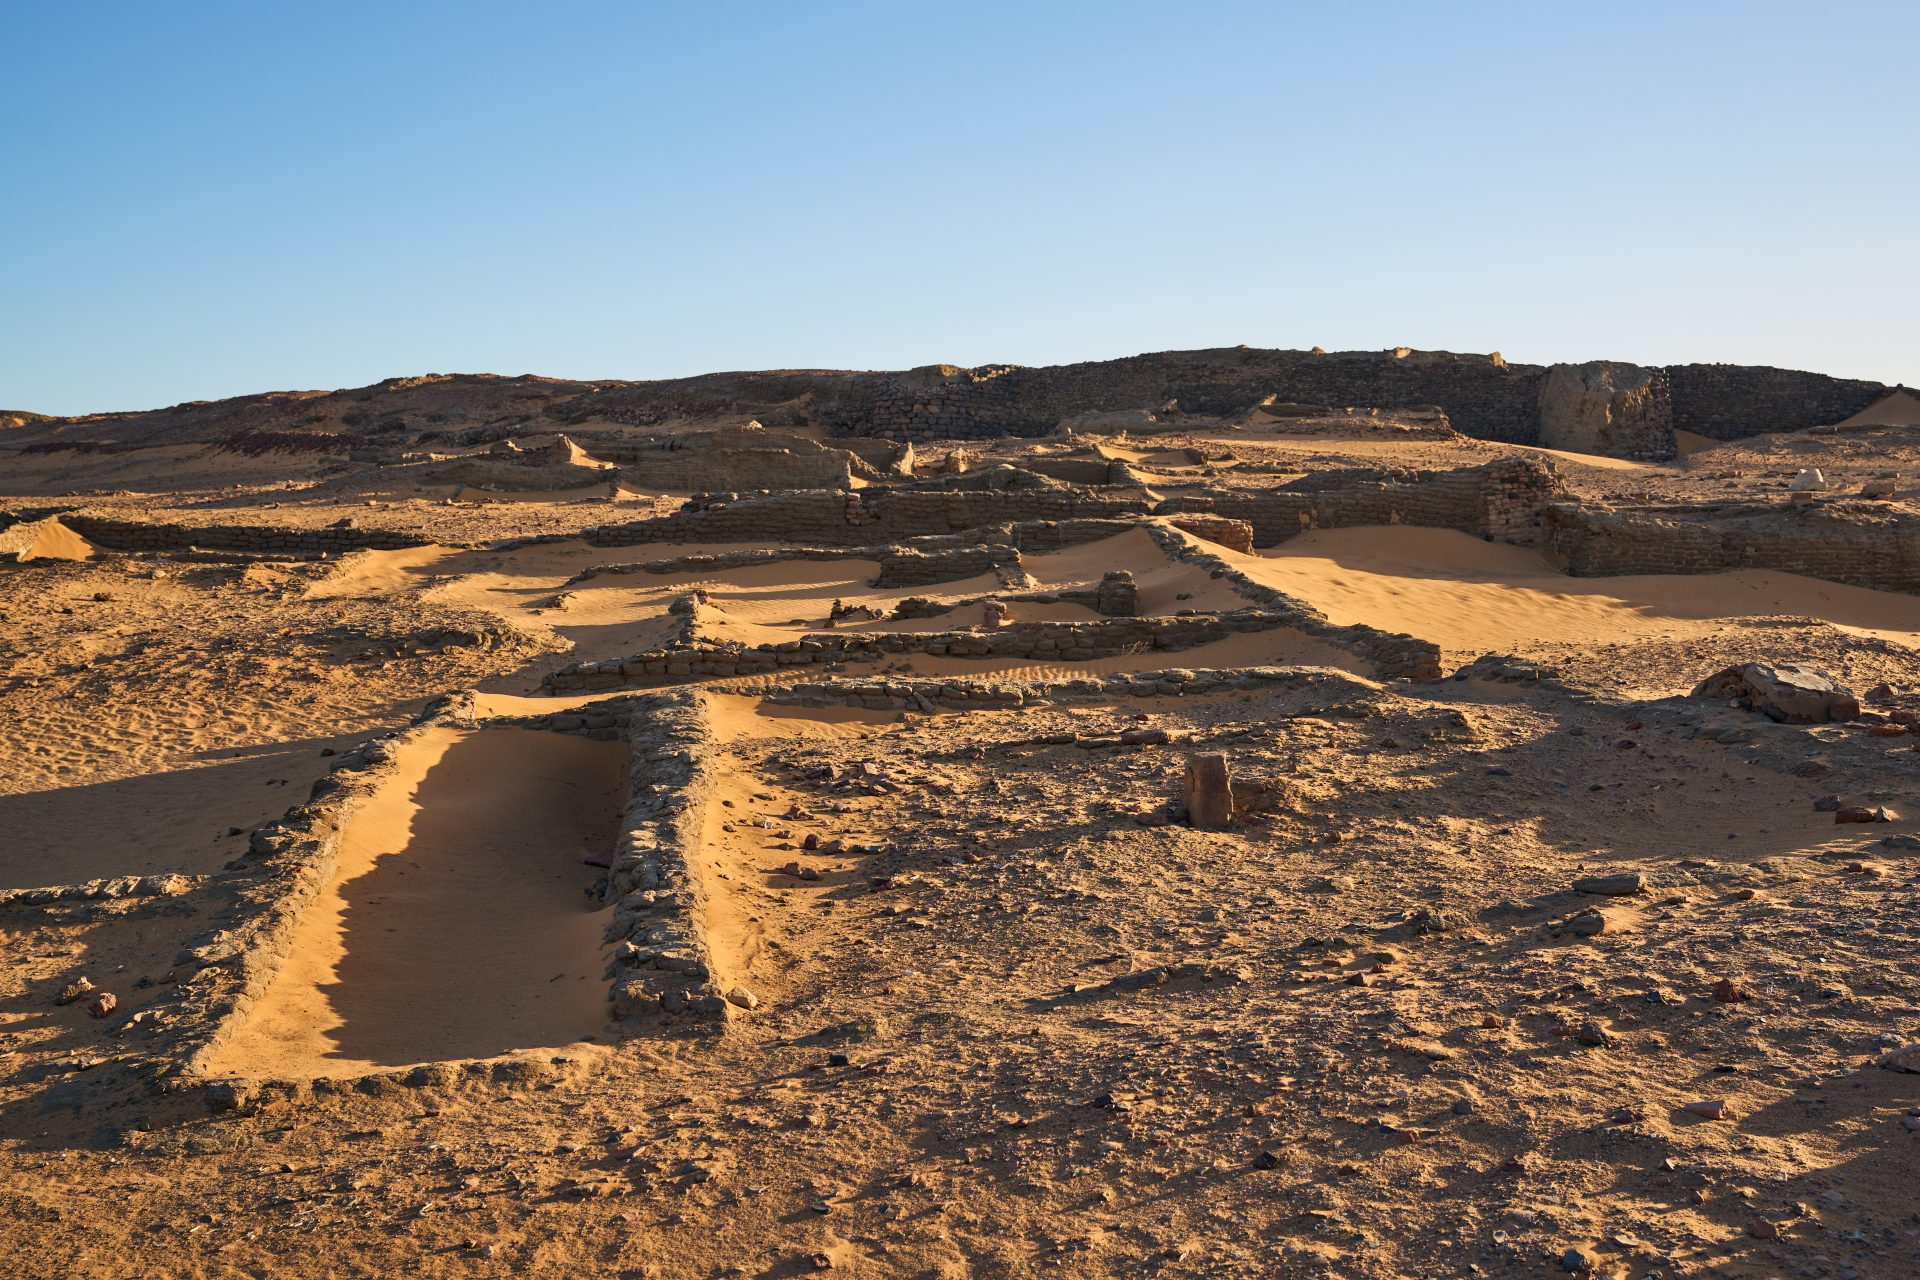 Archeologists unearthed an unusual ancient temple in Africa 